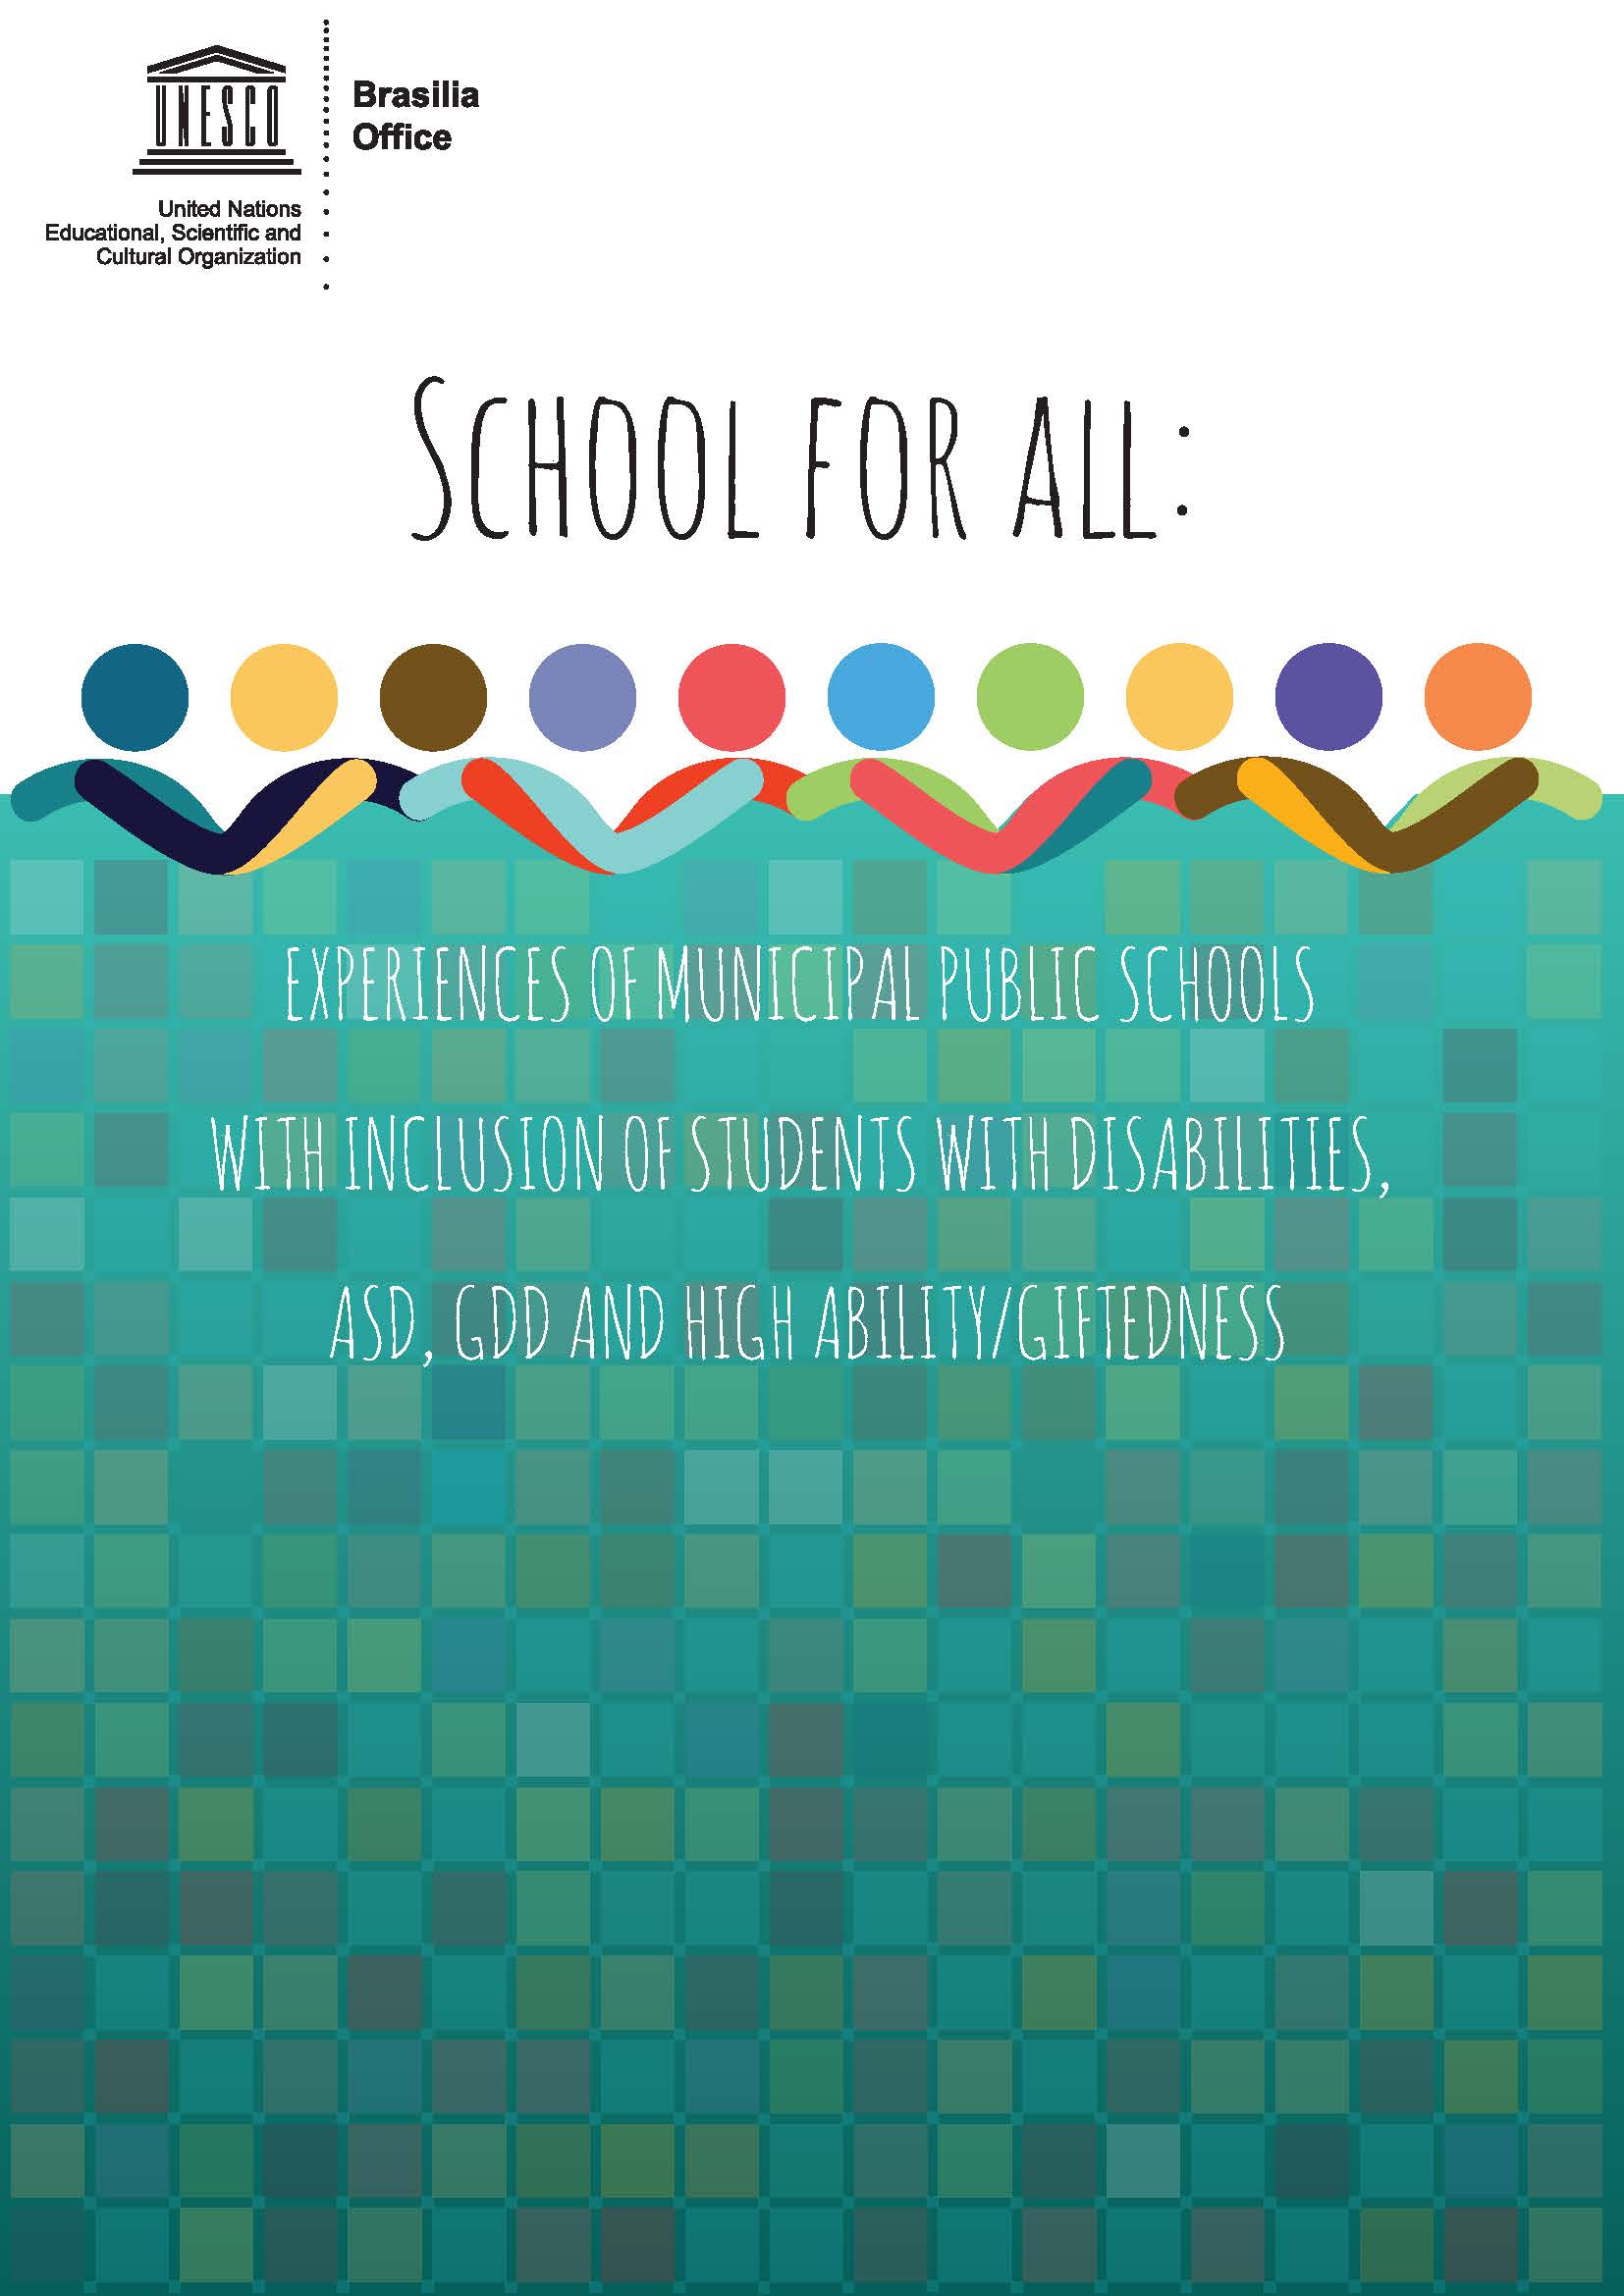 School for All: Experiences of Municipal Public Schools with inclusion of students with disabilities, ASD, GDD, and high ability giftedness